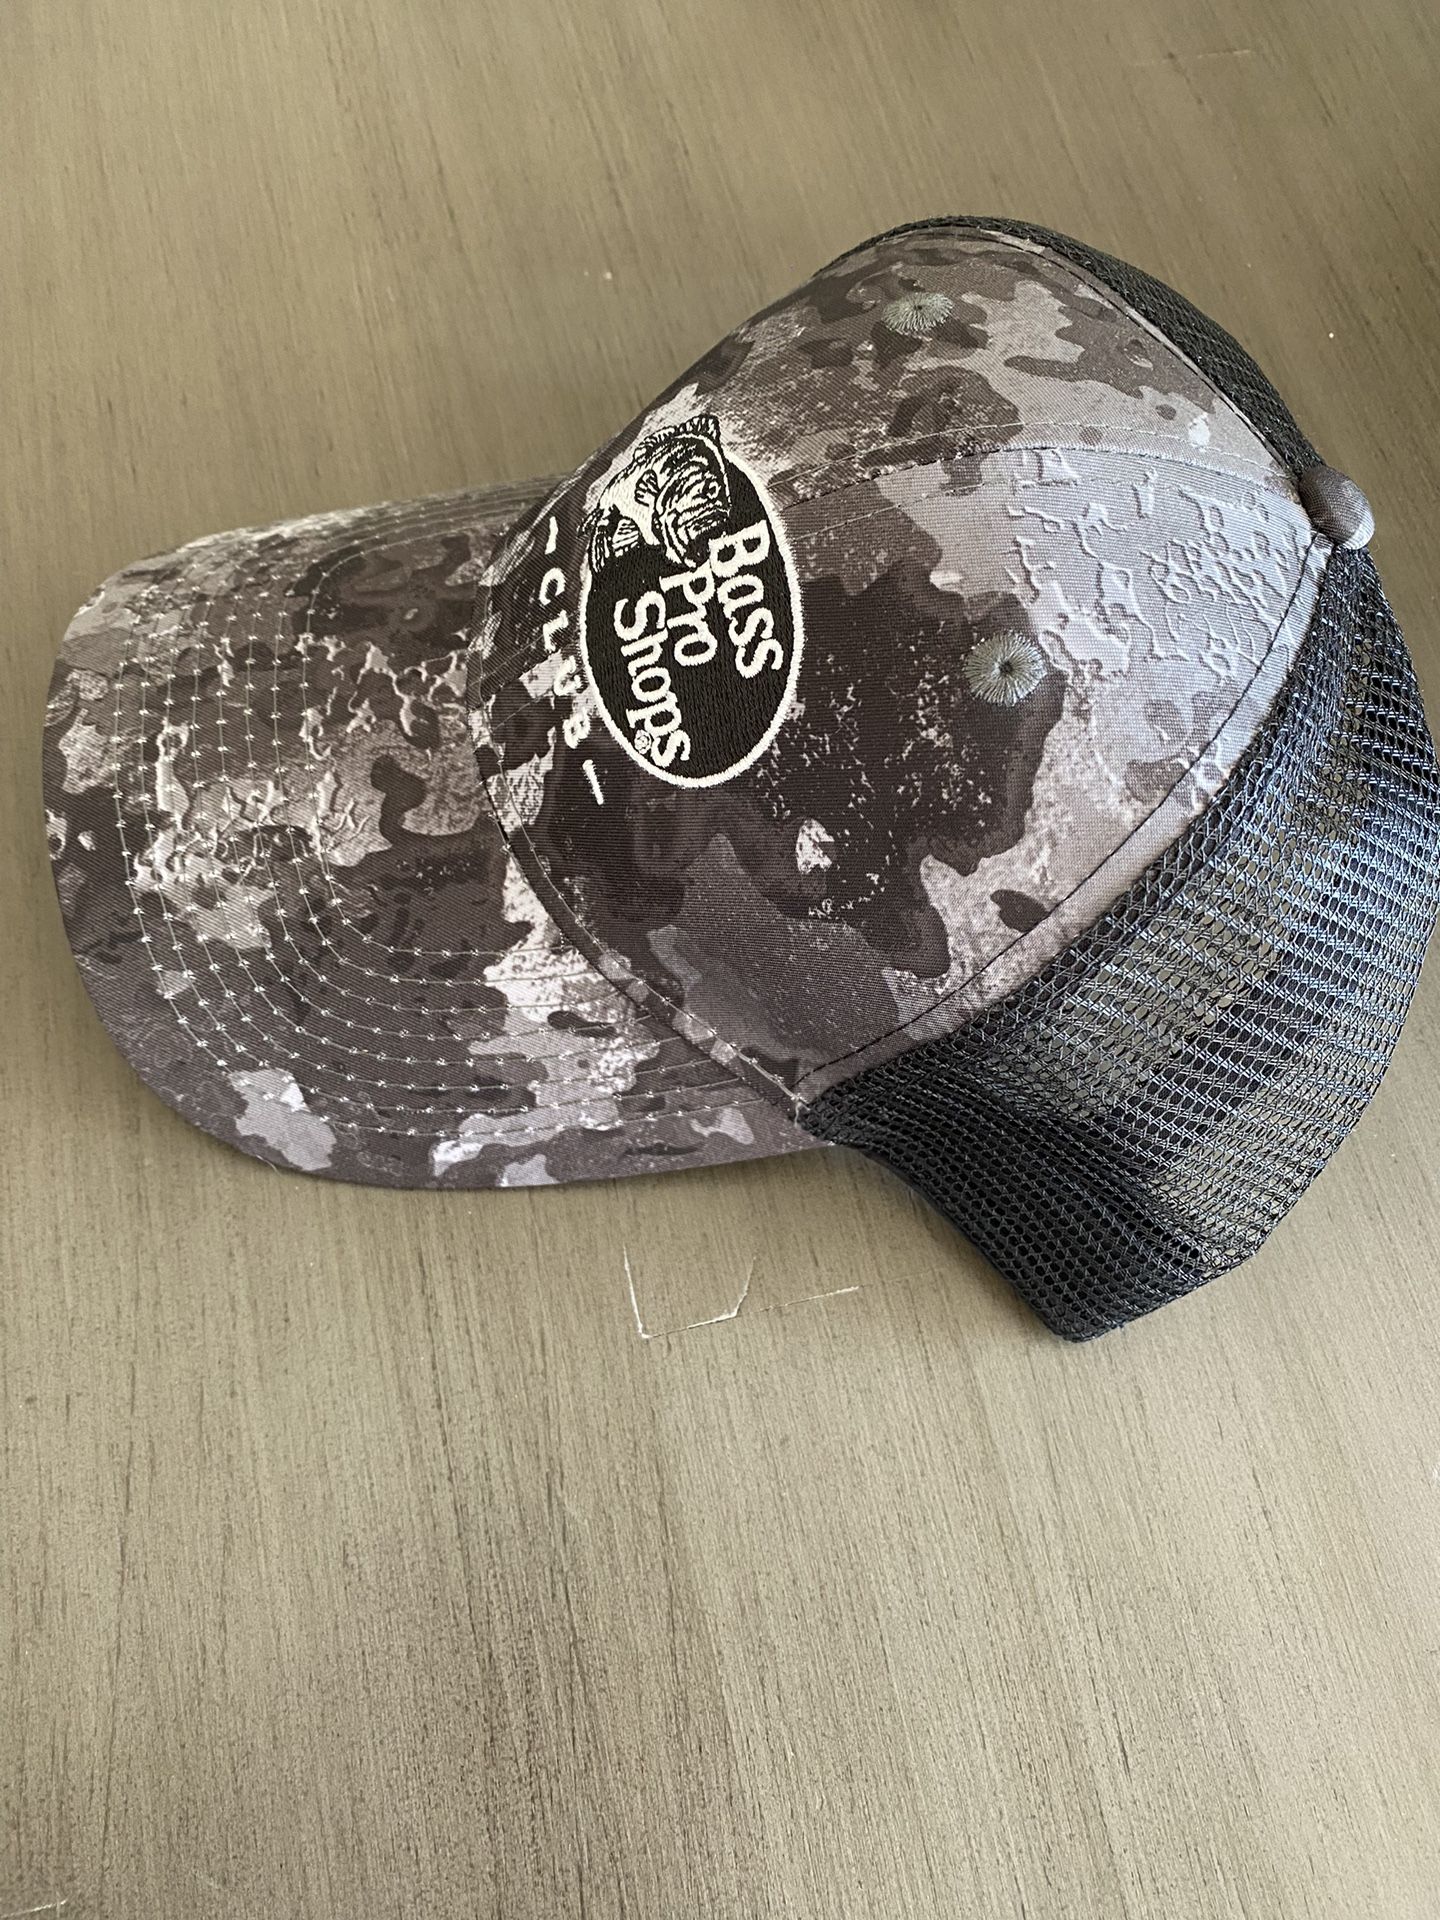 Bass Pro Shop Hat / Adjustable Size: Adjustable Adults, Brand New, Never  Used MAKE AN OFFER !!! for Sale in Citrus Heights, CA - OfferUp